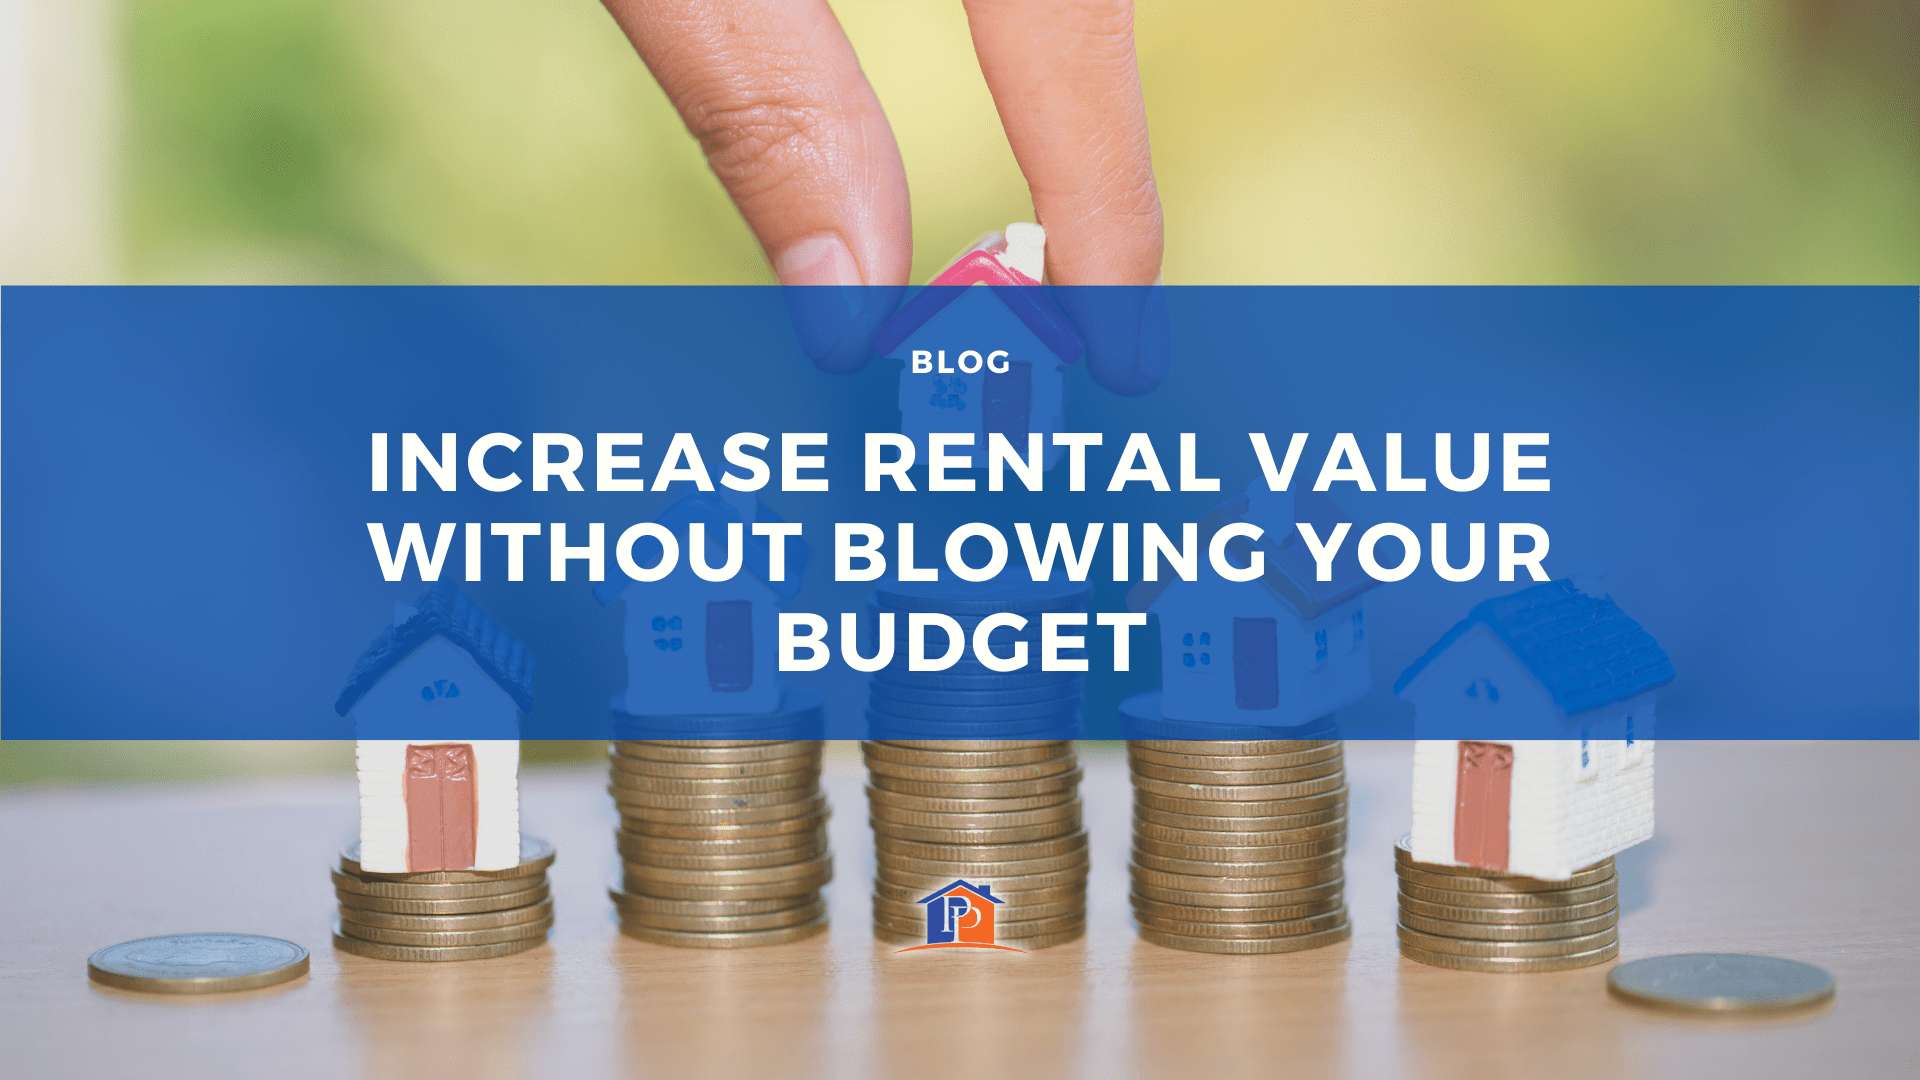 Increase Rental Value Without Blowing Your Budget